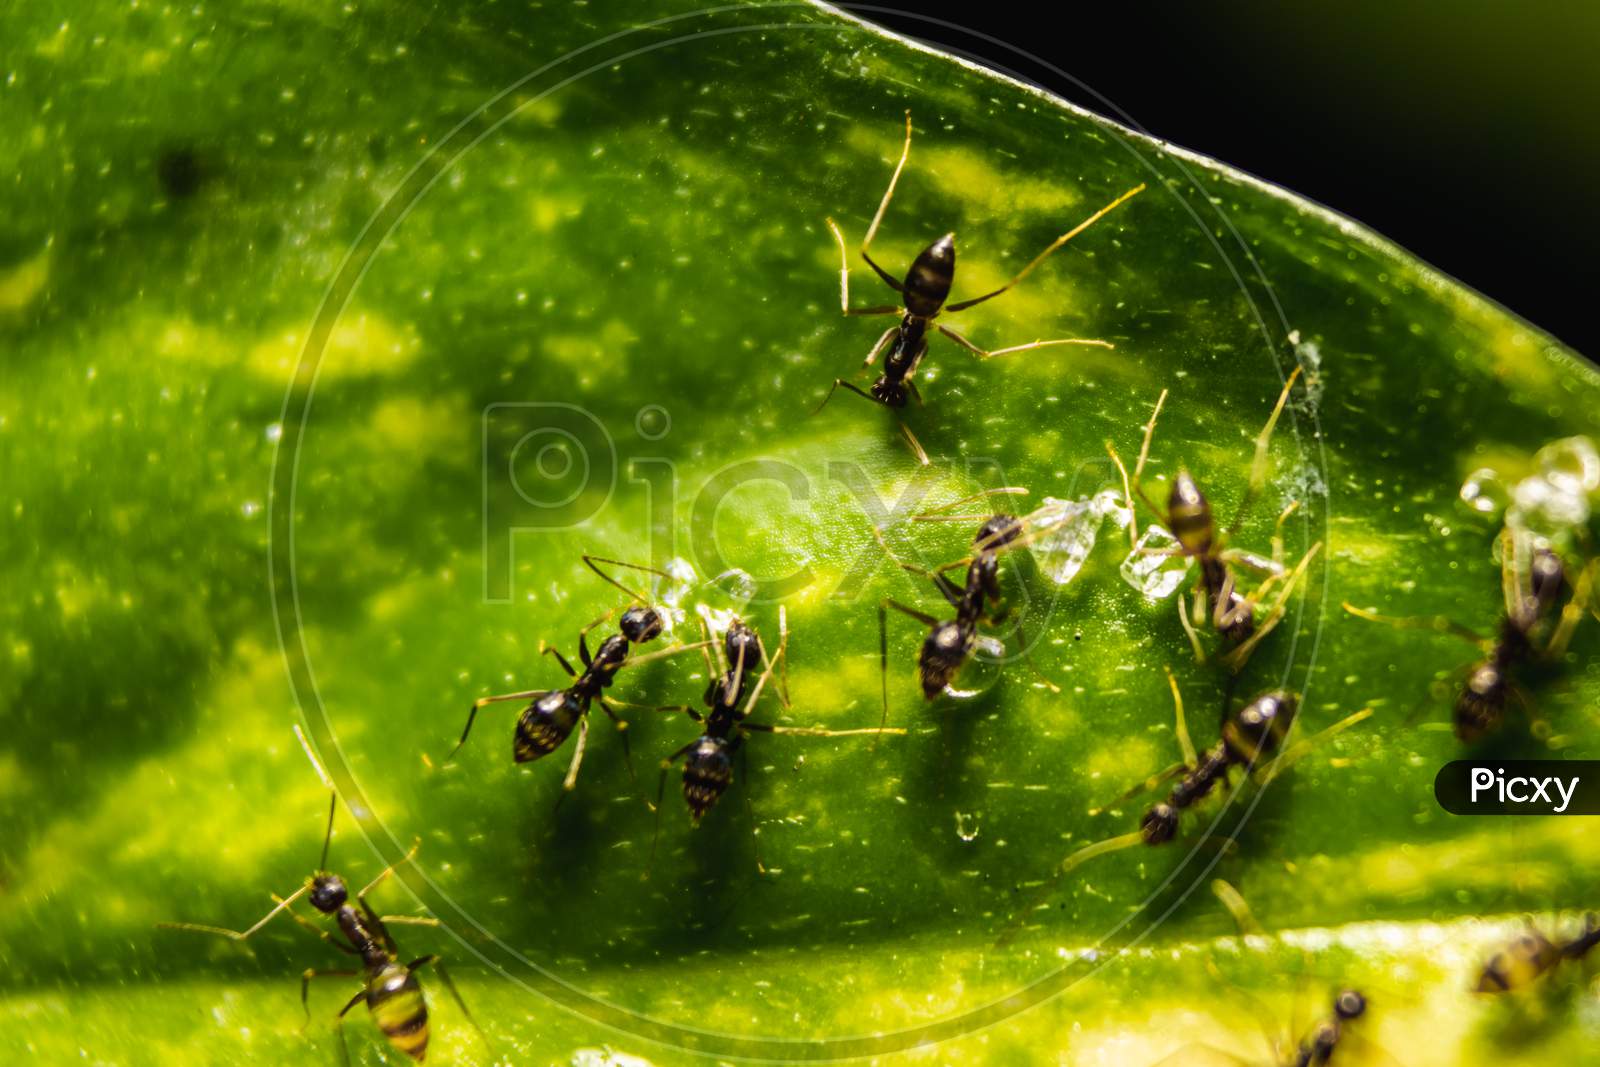 Group Of Small Black Ants Eating Sugar Bar On The Leafs With Selective Focus. Macro Close Up A Lot Of Black Ants On Leaves With Lighting.